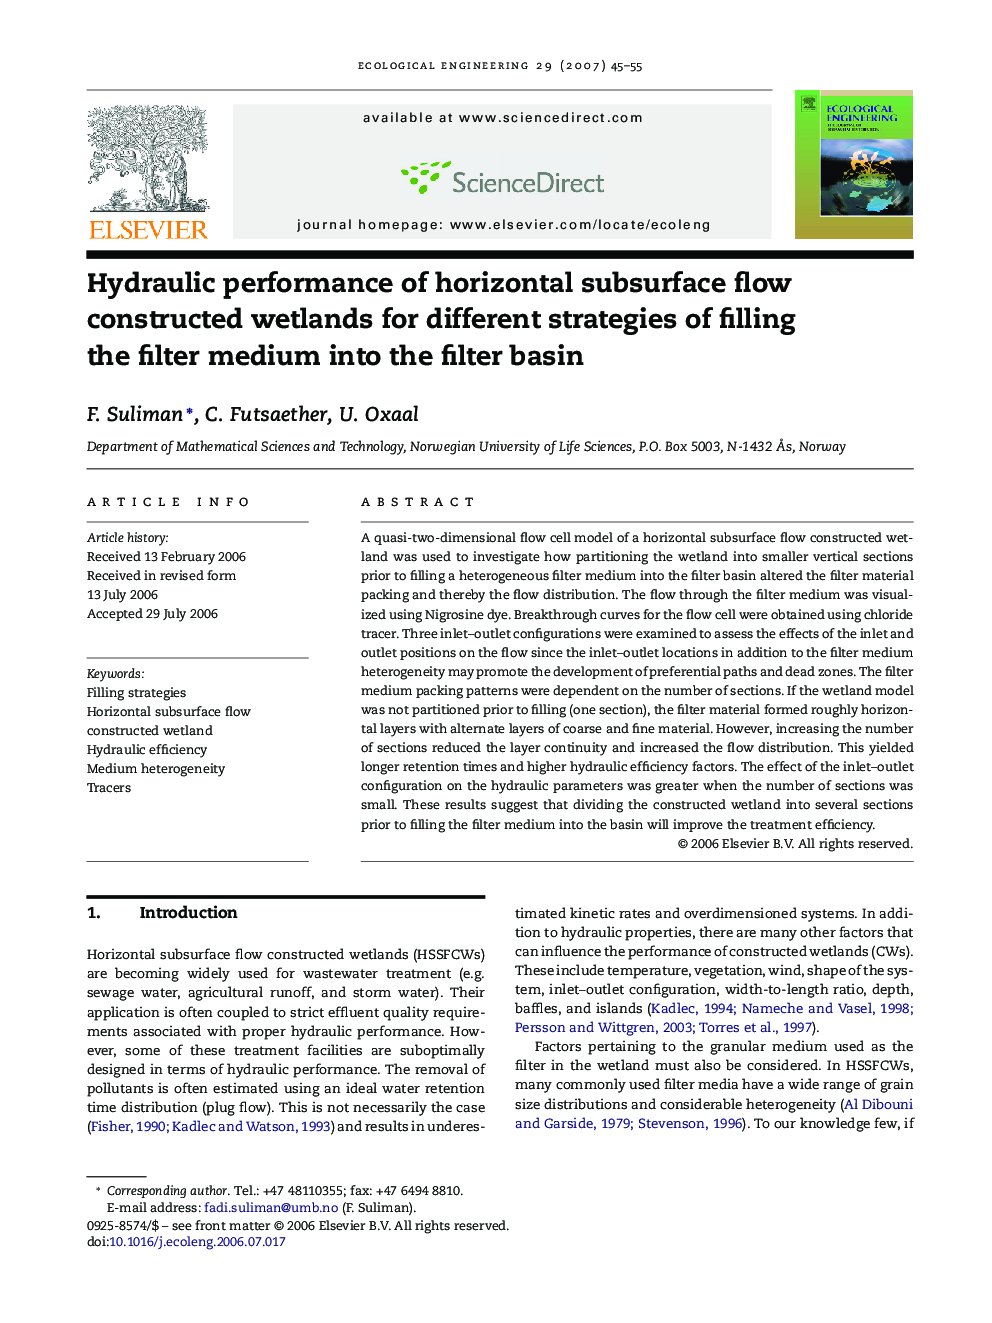 Hydraulic performance of horizontal subsurface flow constructed wetlands for different strategies of filling the filter medium into the filter basin